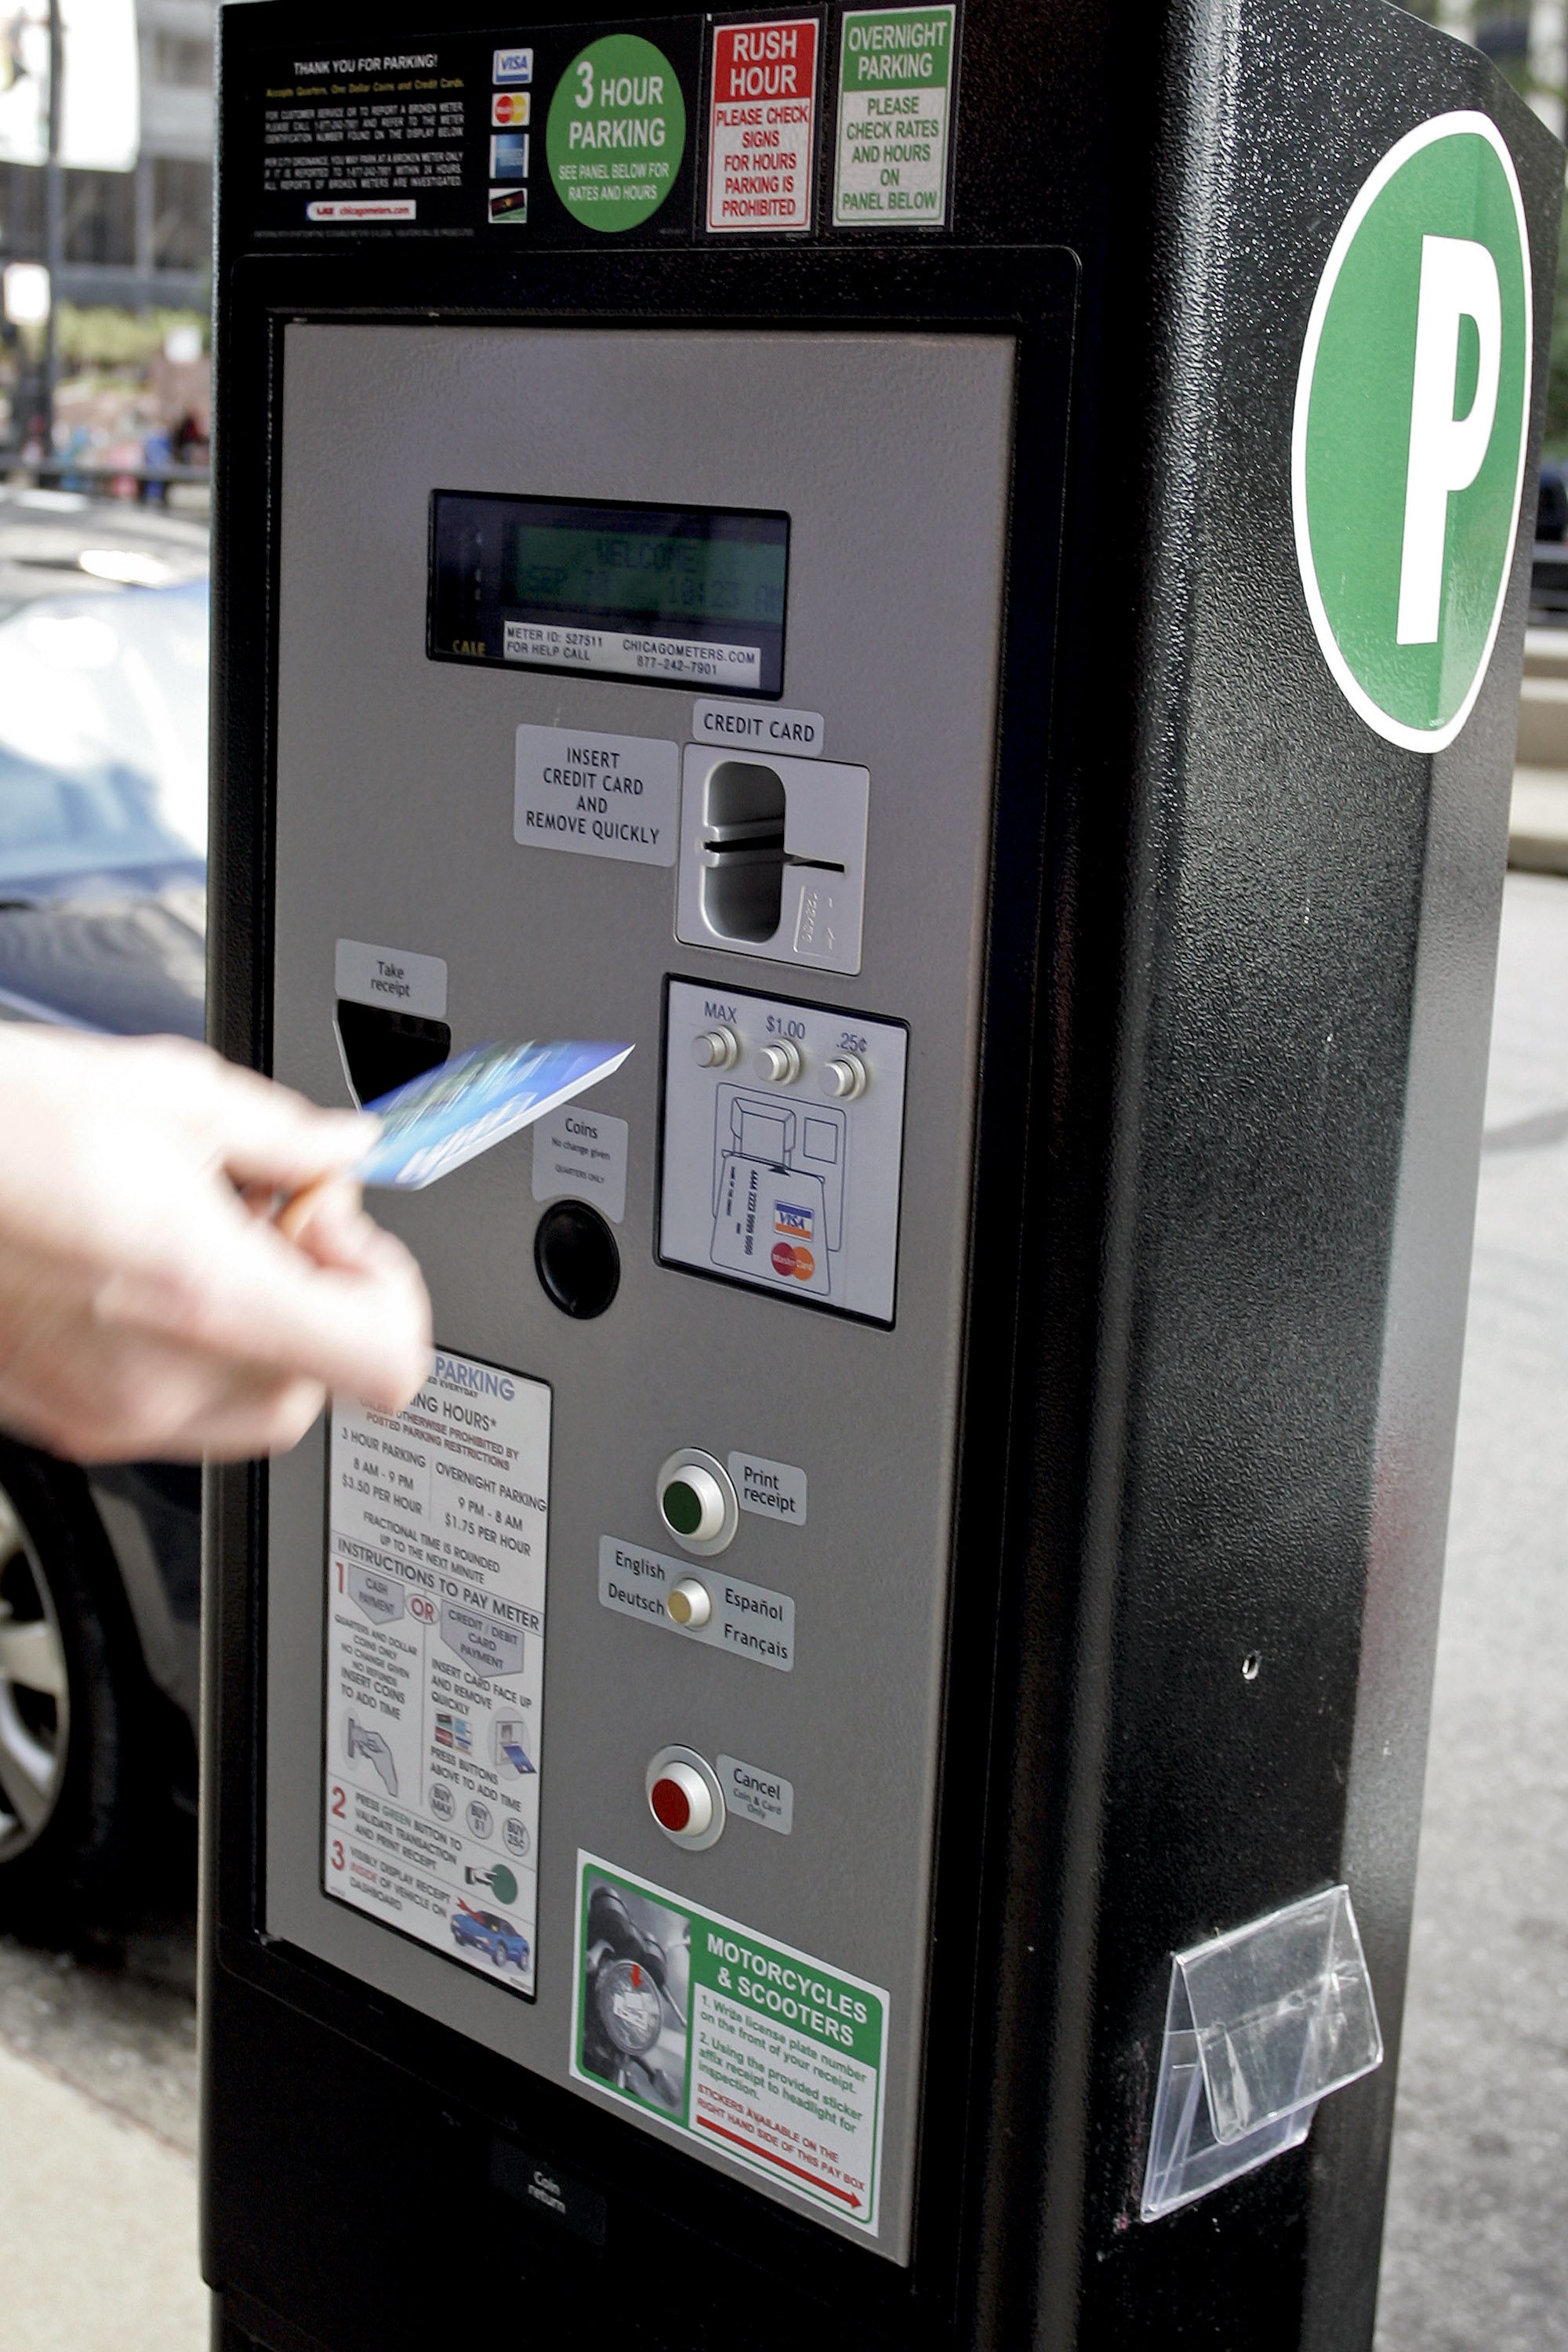 Parking meter deal gets even worse for Chicago taxpayers, audit shows -  Chicago Sun-Times